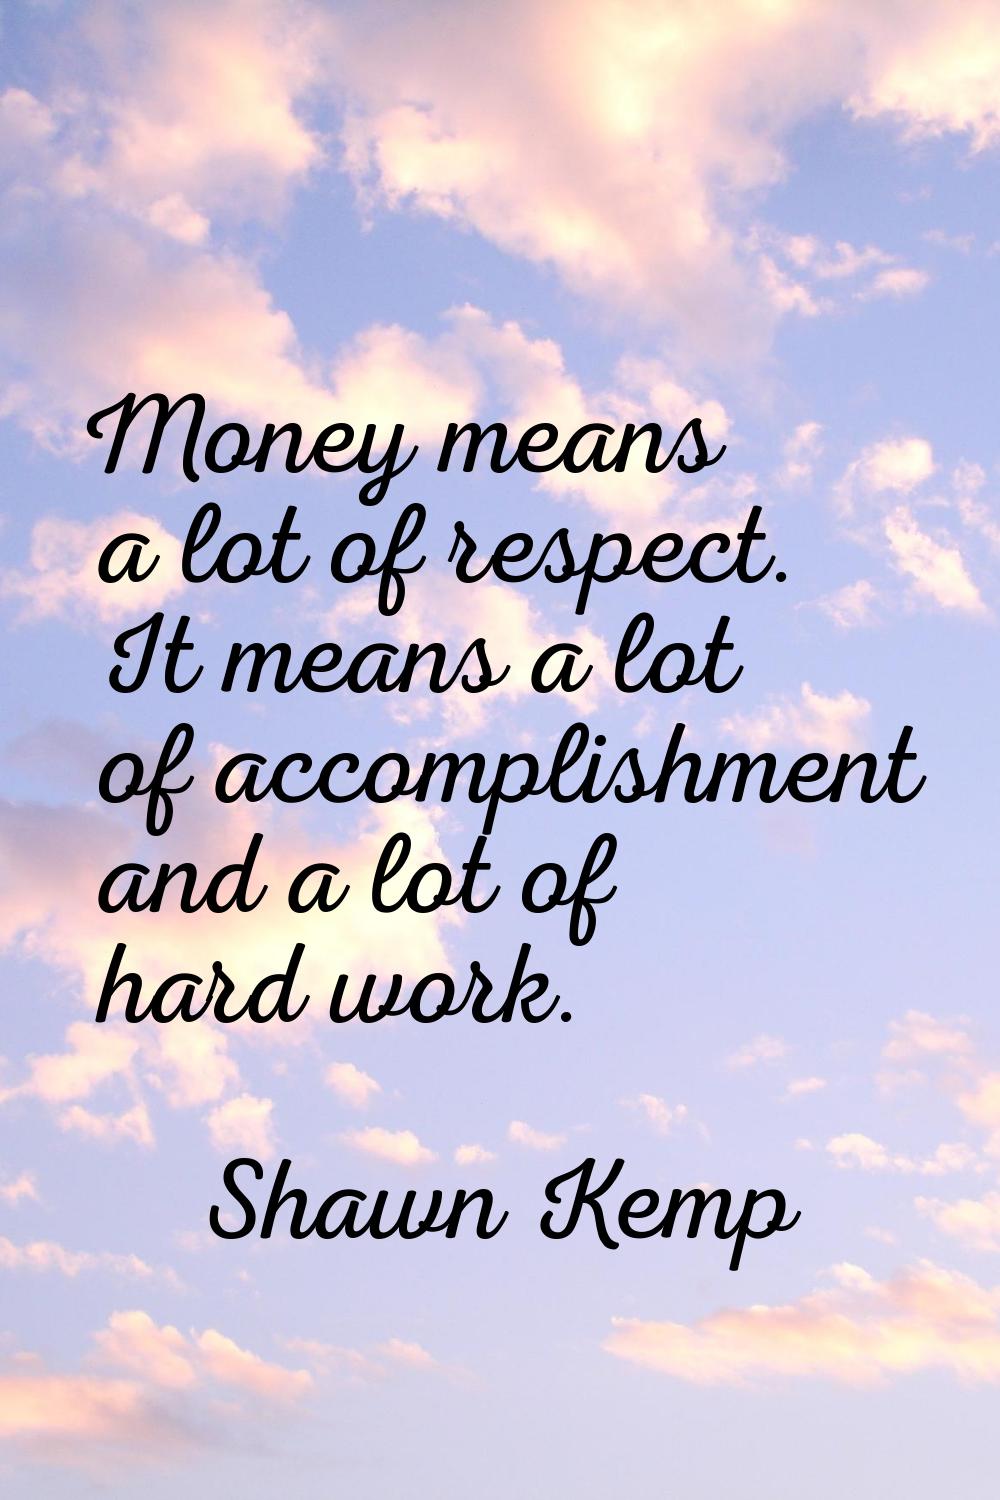 Money means a lot of respect. It means a lot of accomplishment and a lot of hard work.